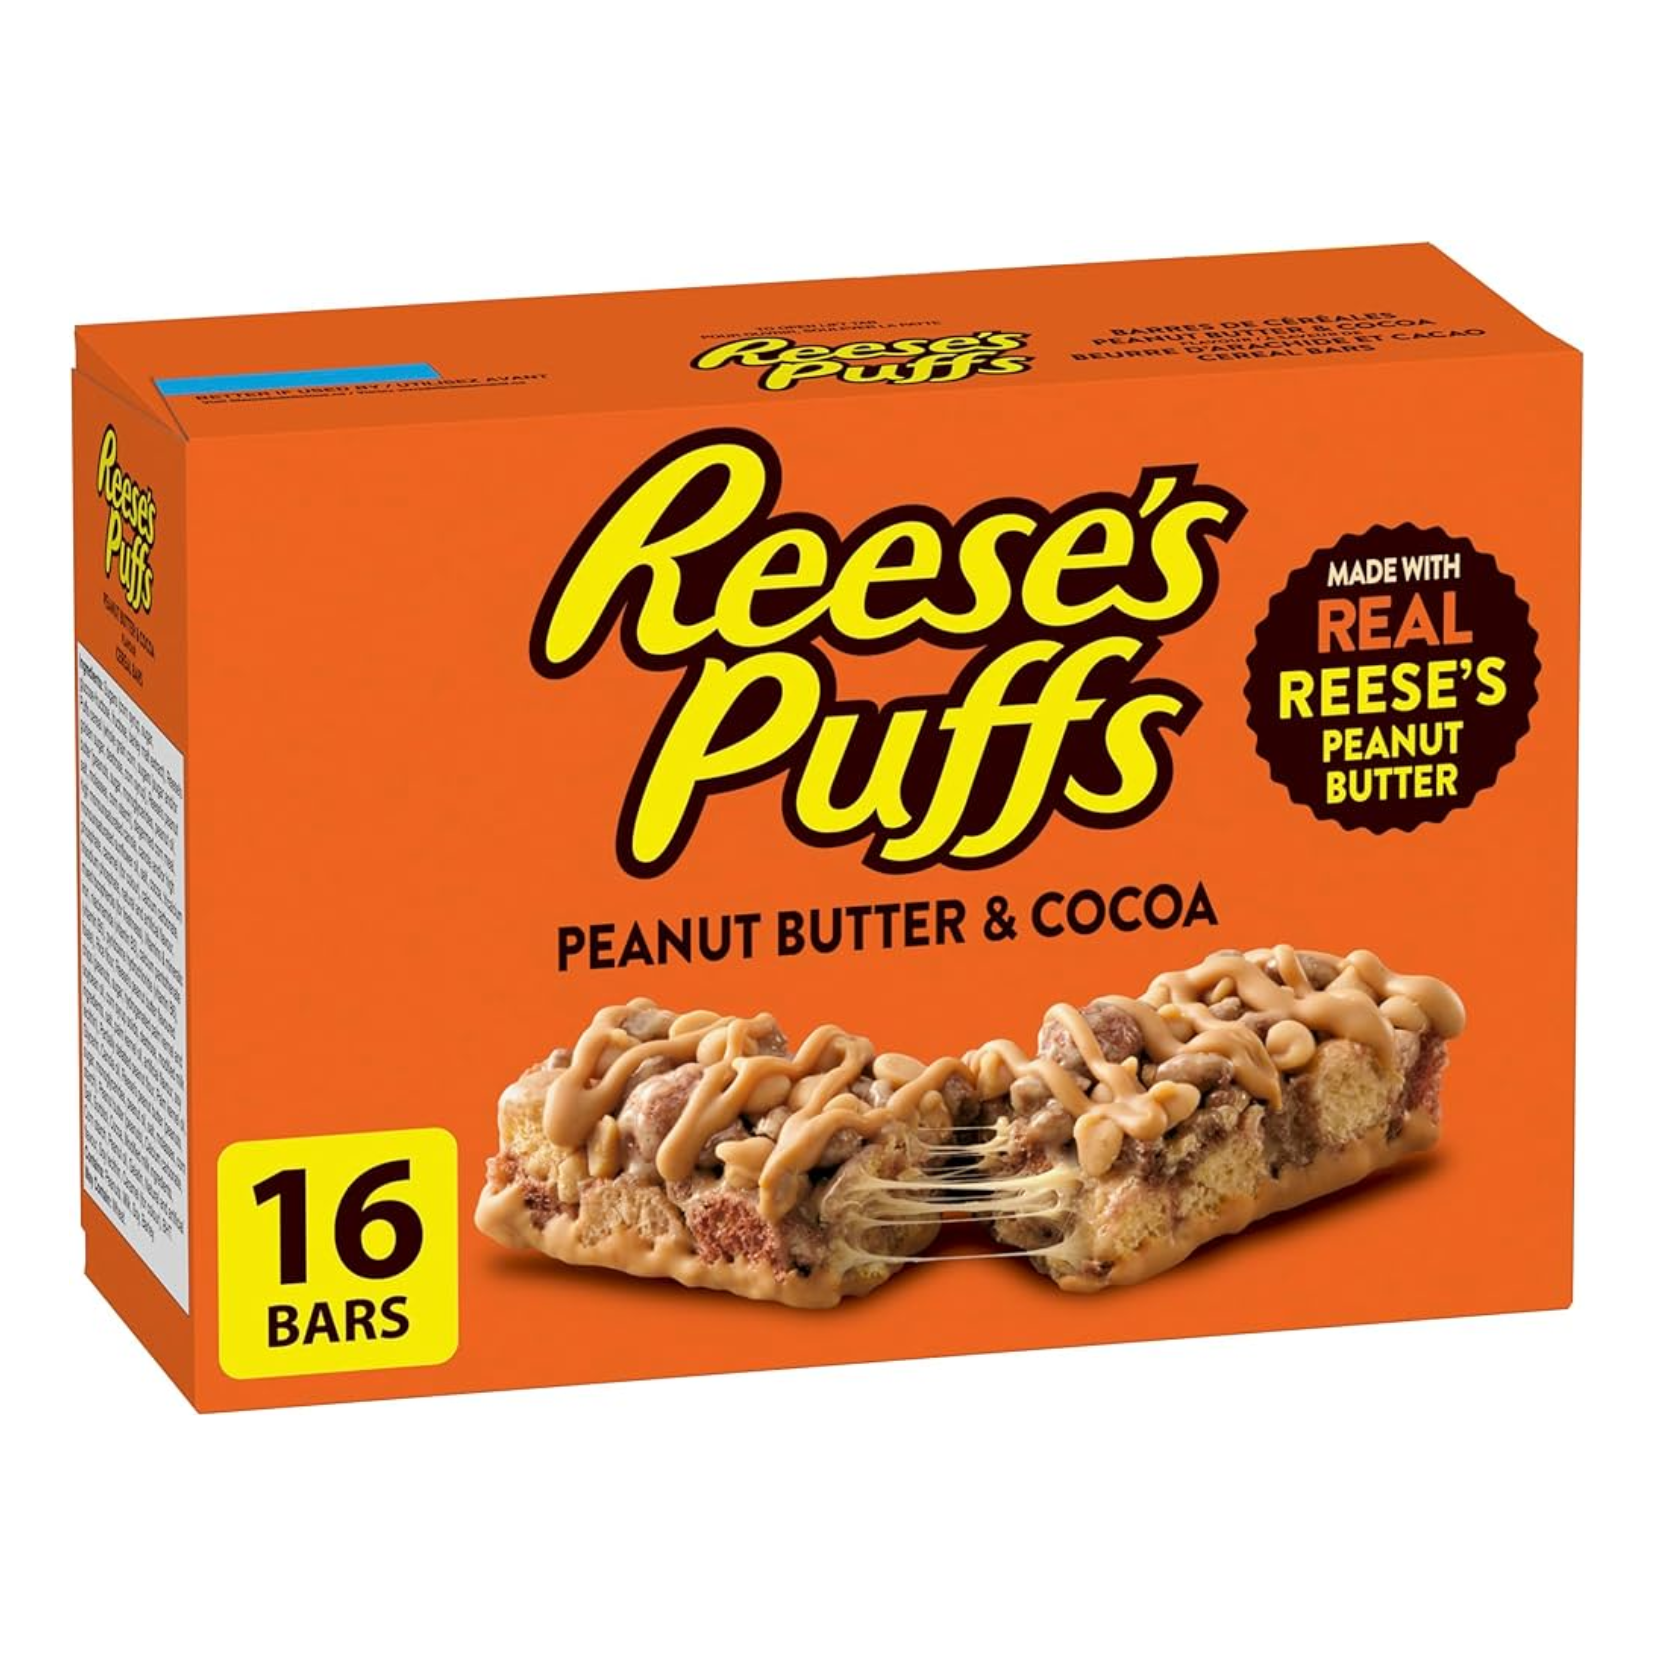 Reese's Puffs Peanut Butter & Cocoa Flavour Cereal Bars 24g x 16